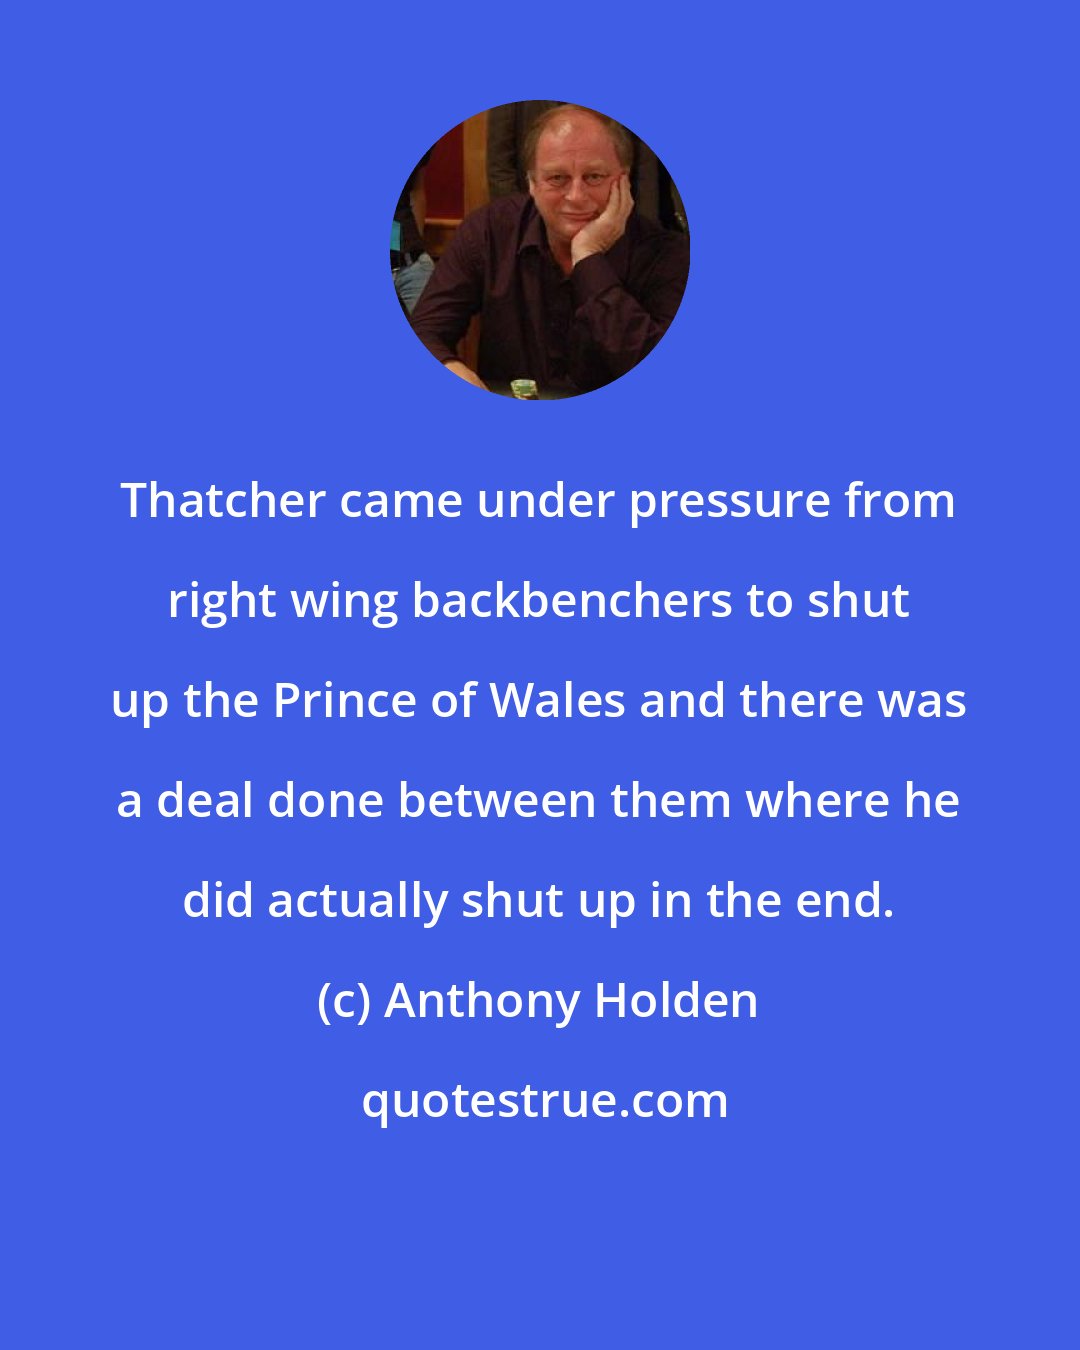 Anthony Holden: Thatcher came under pressure from right wing backbenchers to shut up the Prince of Wales and there was a deal done between them where he did actually shut up in the end.